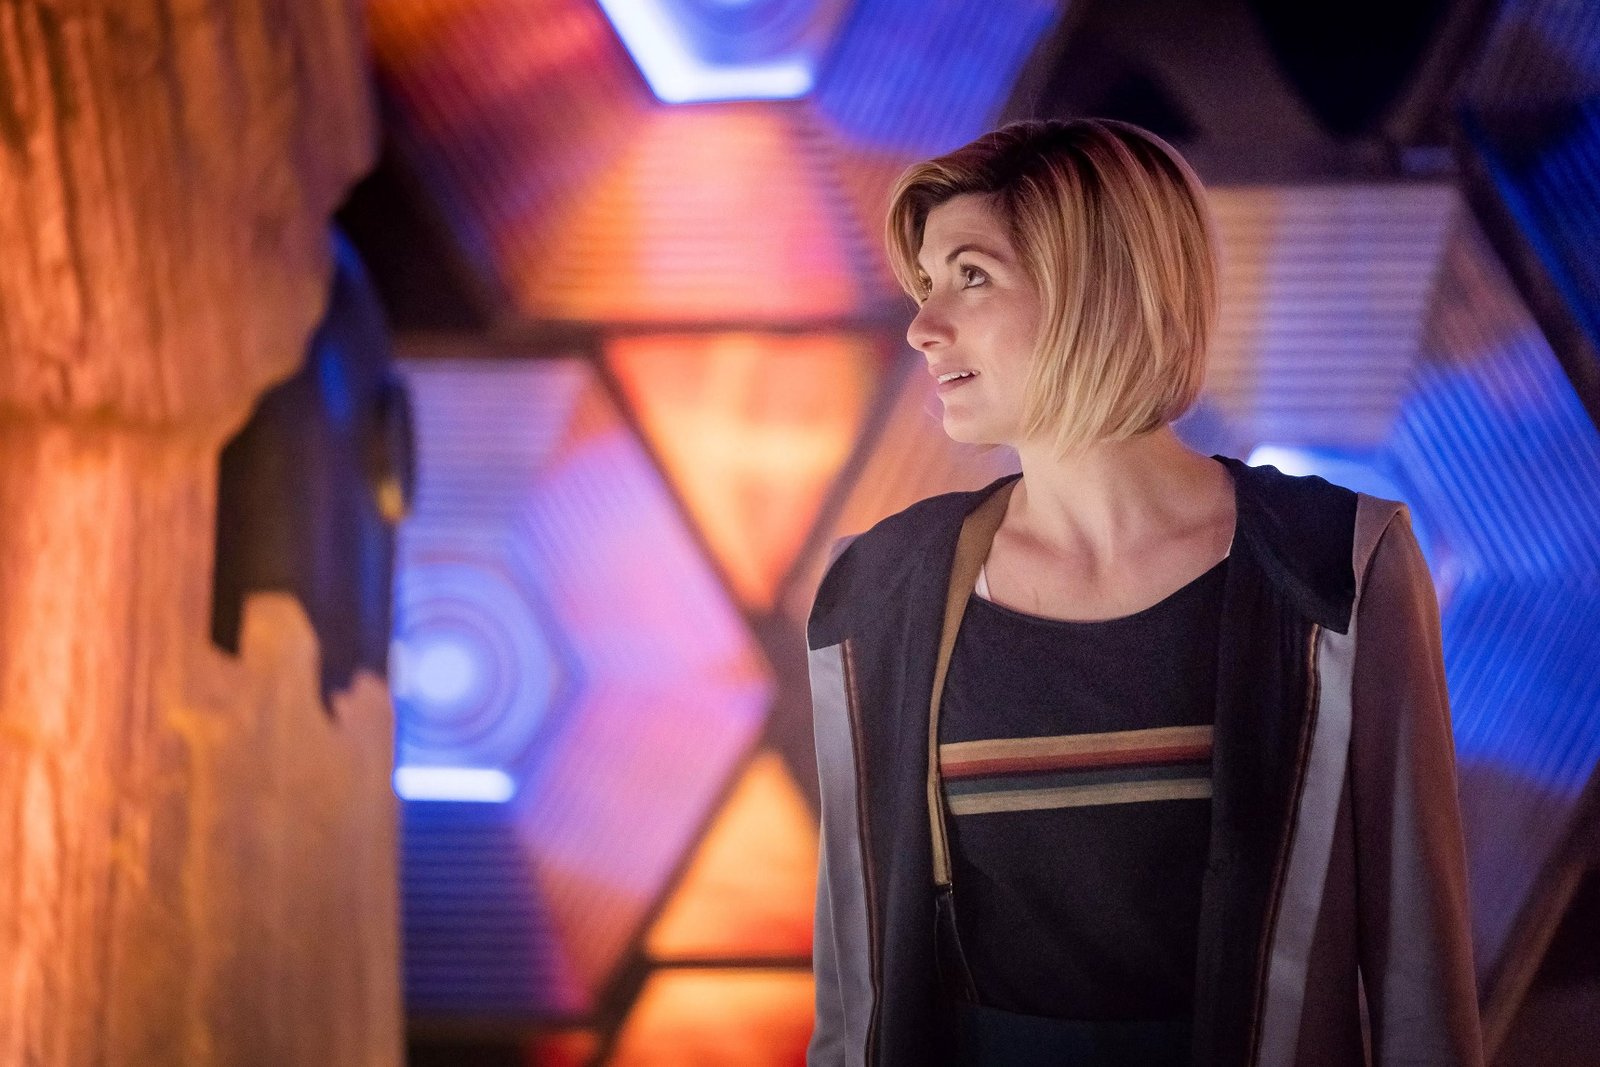 BBC Confirm Doctor Who Series 11 Will Air 'By October'